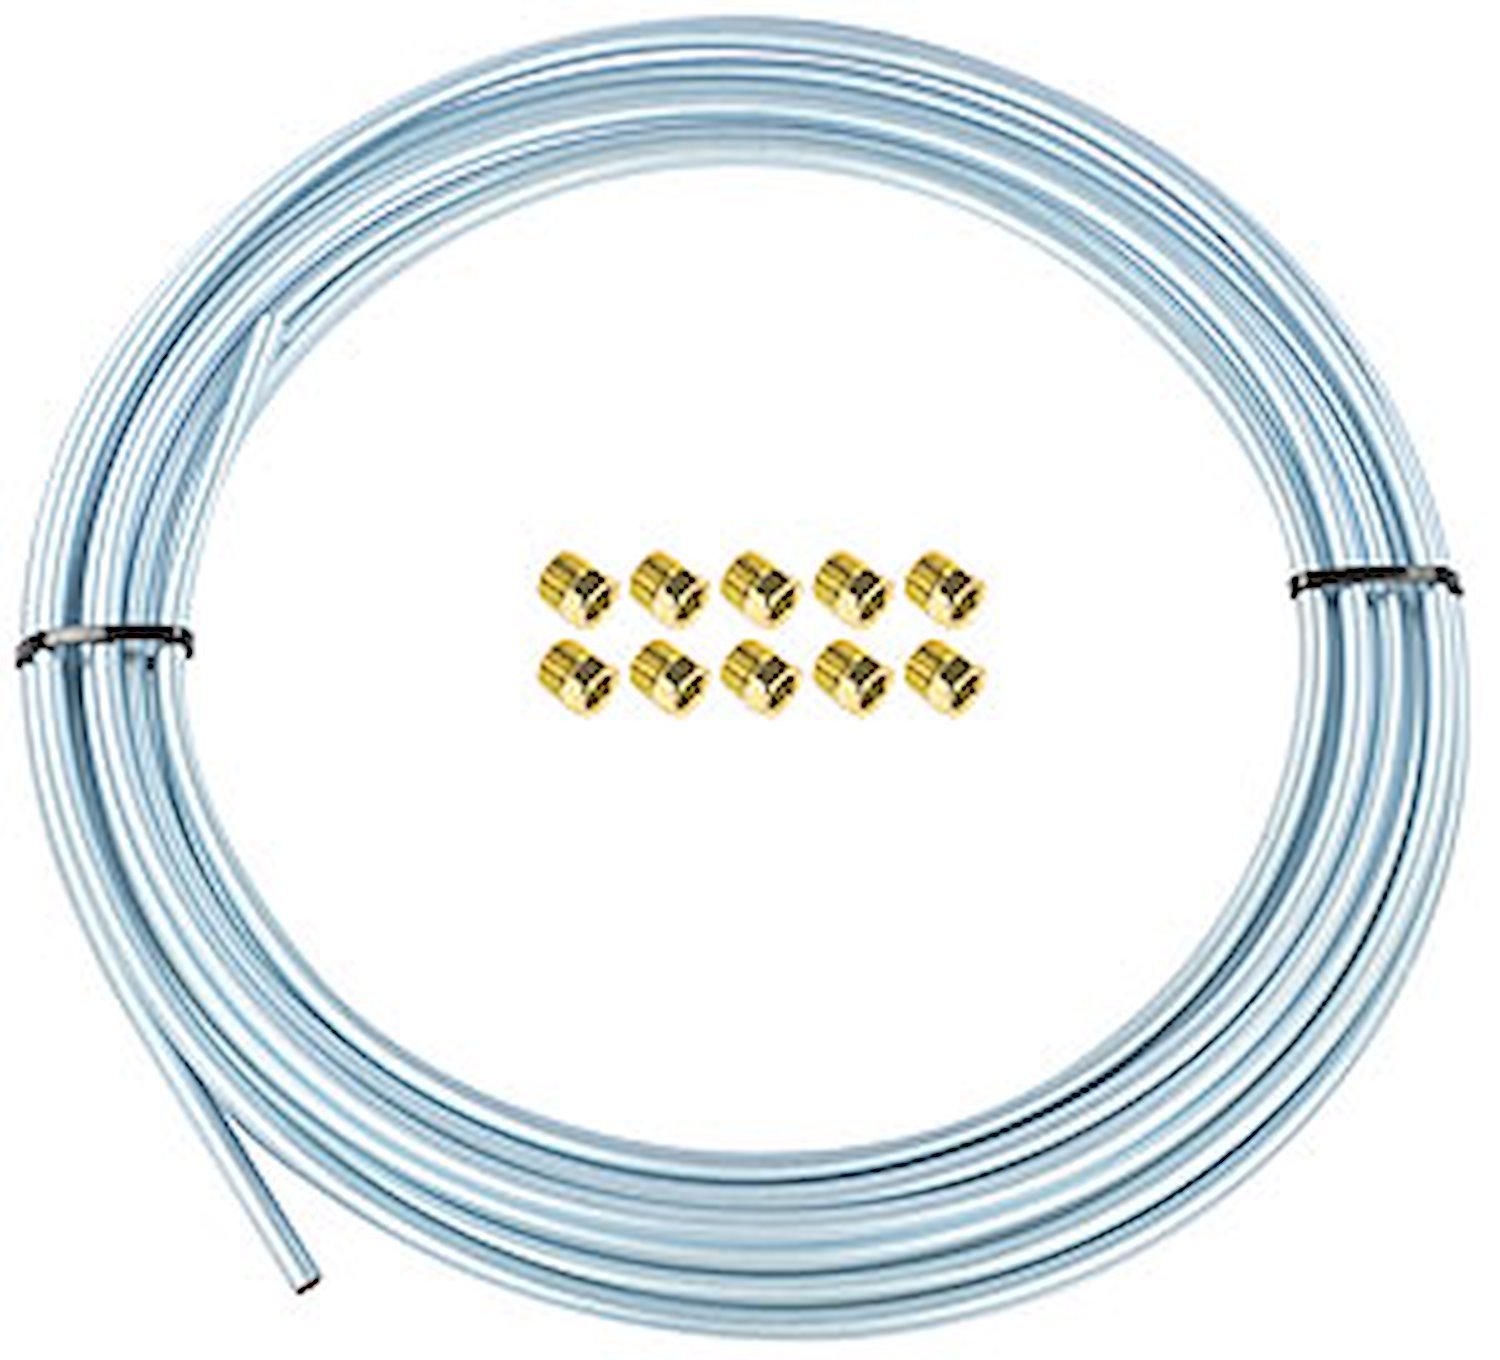 Zinc Fuel and Transmission Cooler Tubing Kit 5/16 in. Diameter x 25 ft.